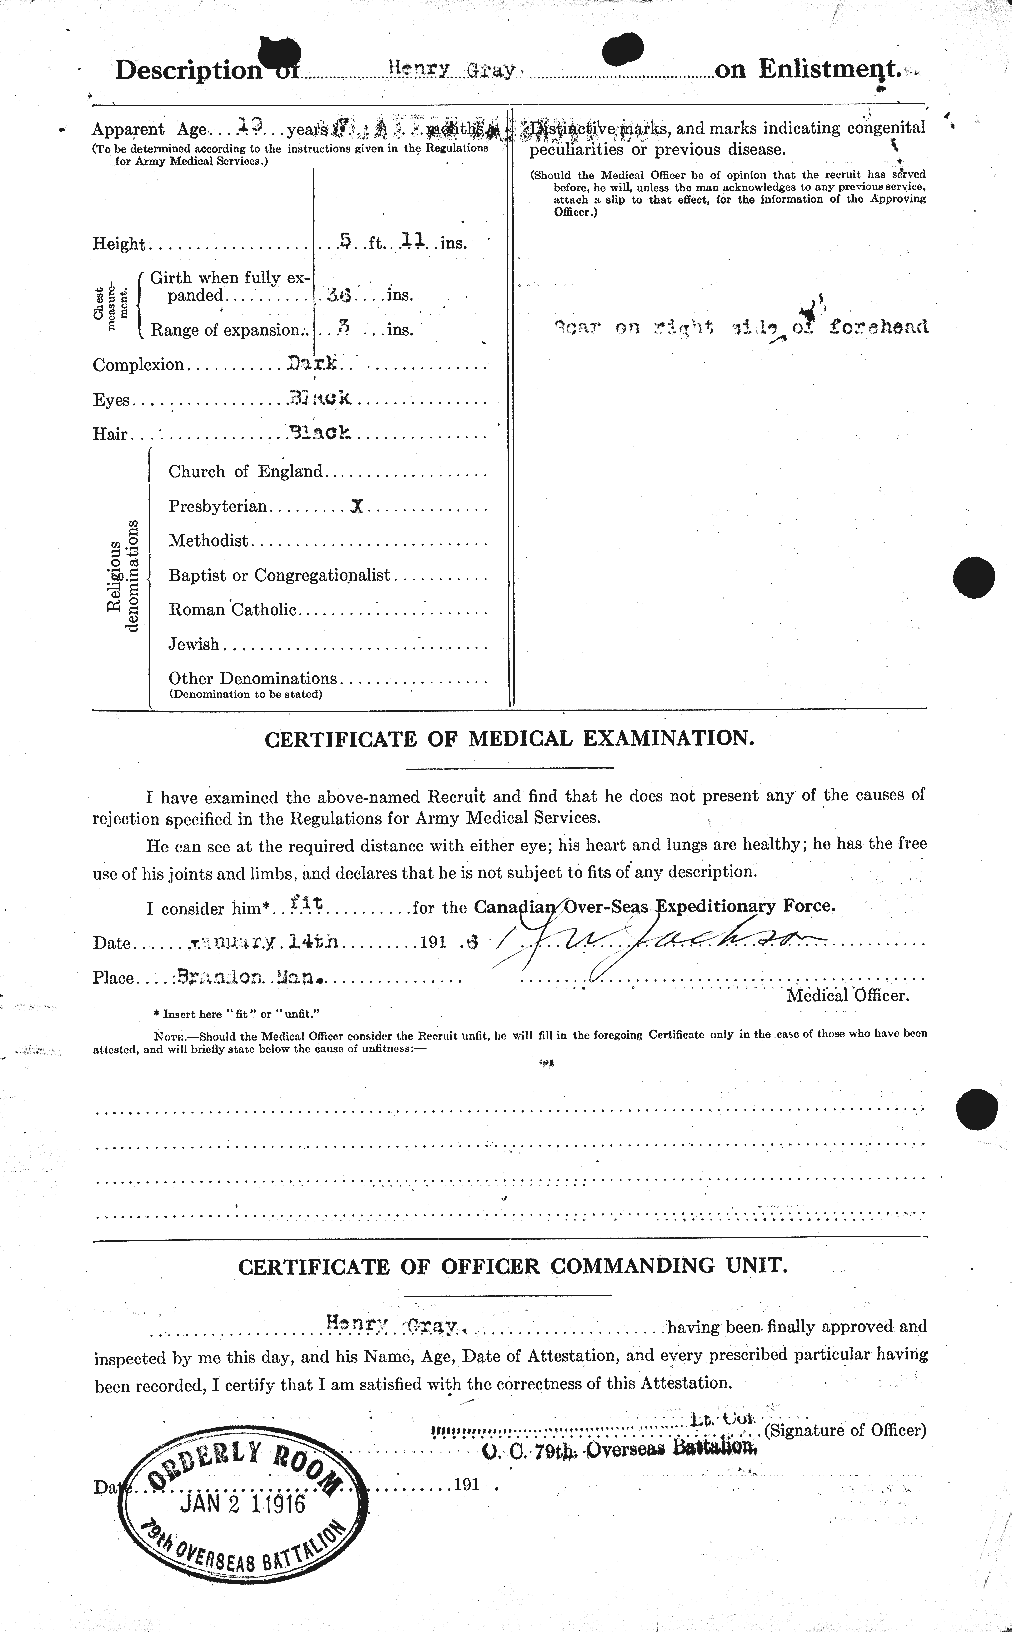 Personnel Records of the First World War - CEF 363225b